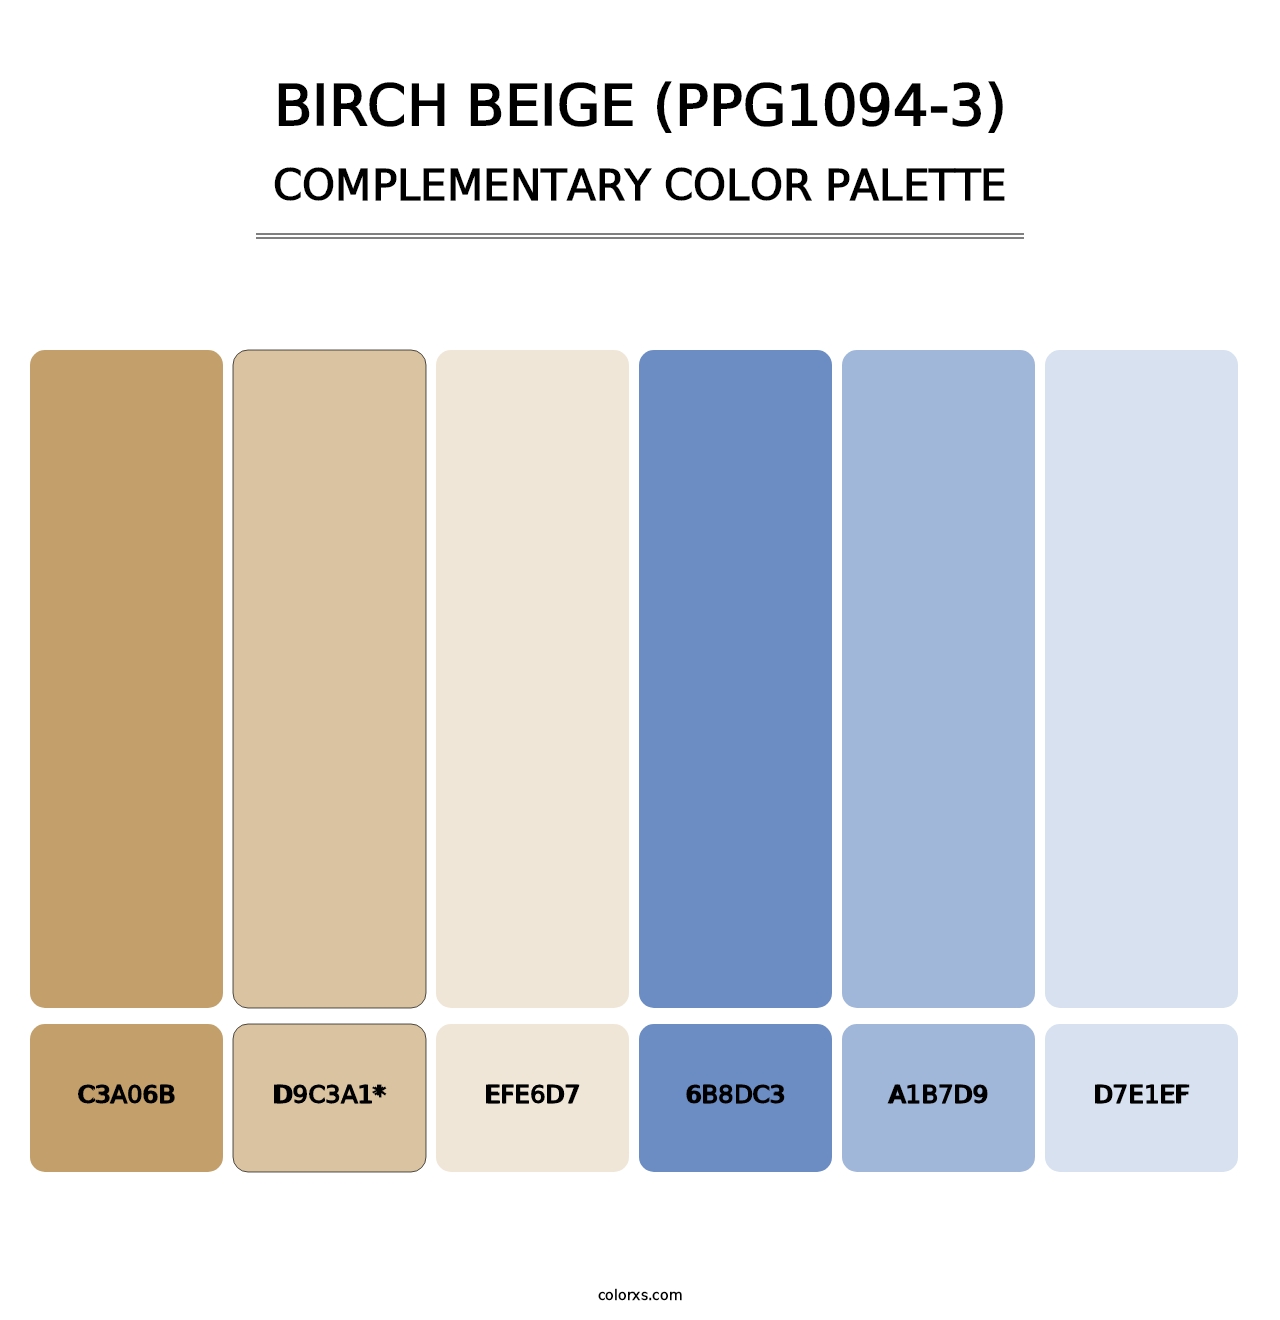 Birch Beige (PPG1094-3) - Complementary Color Palette